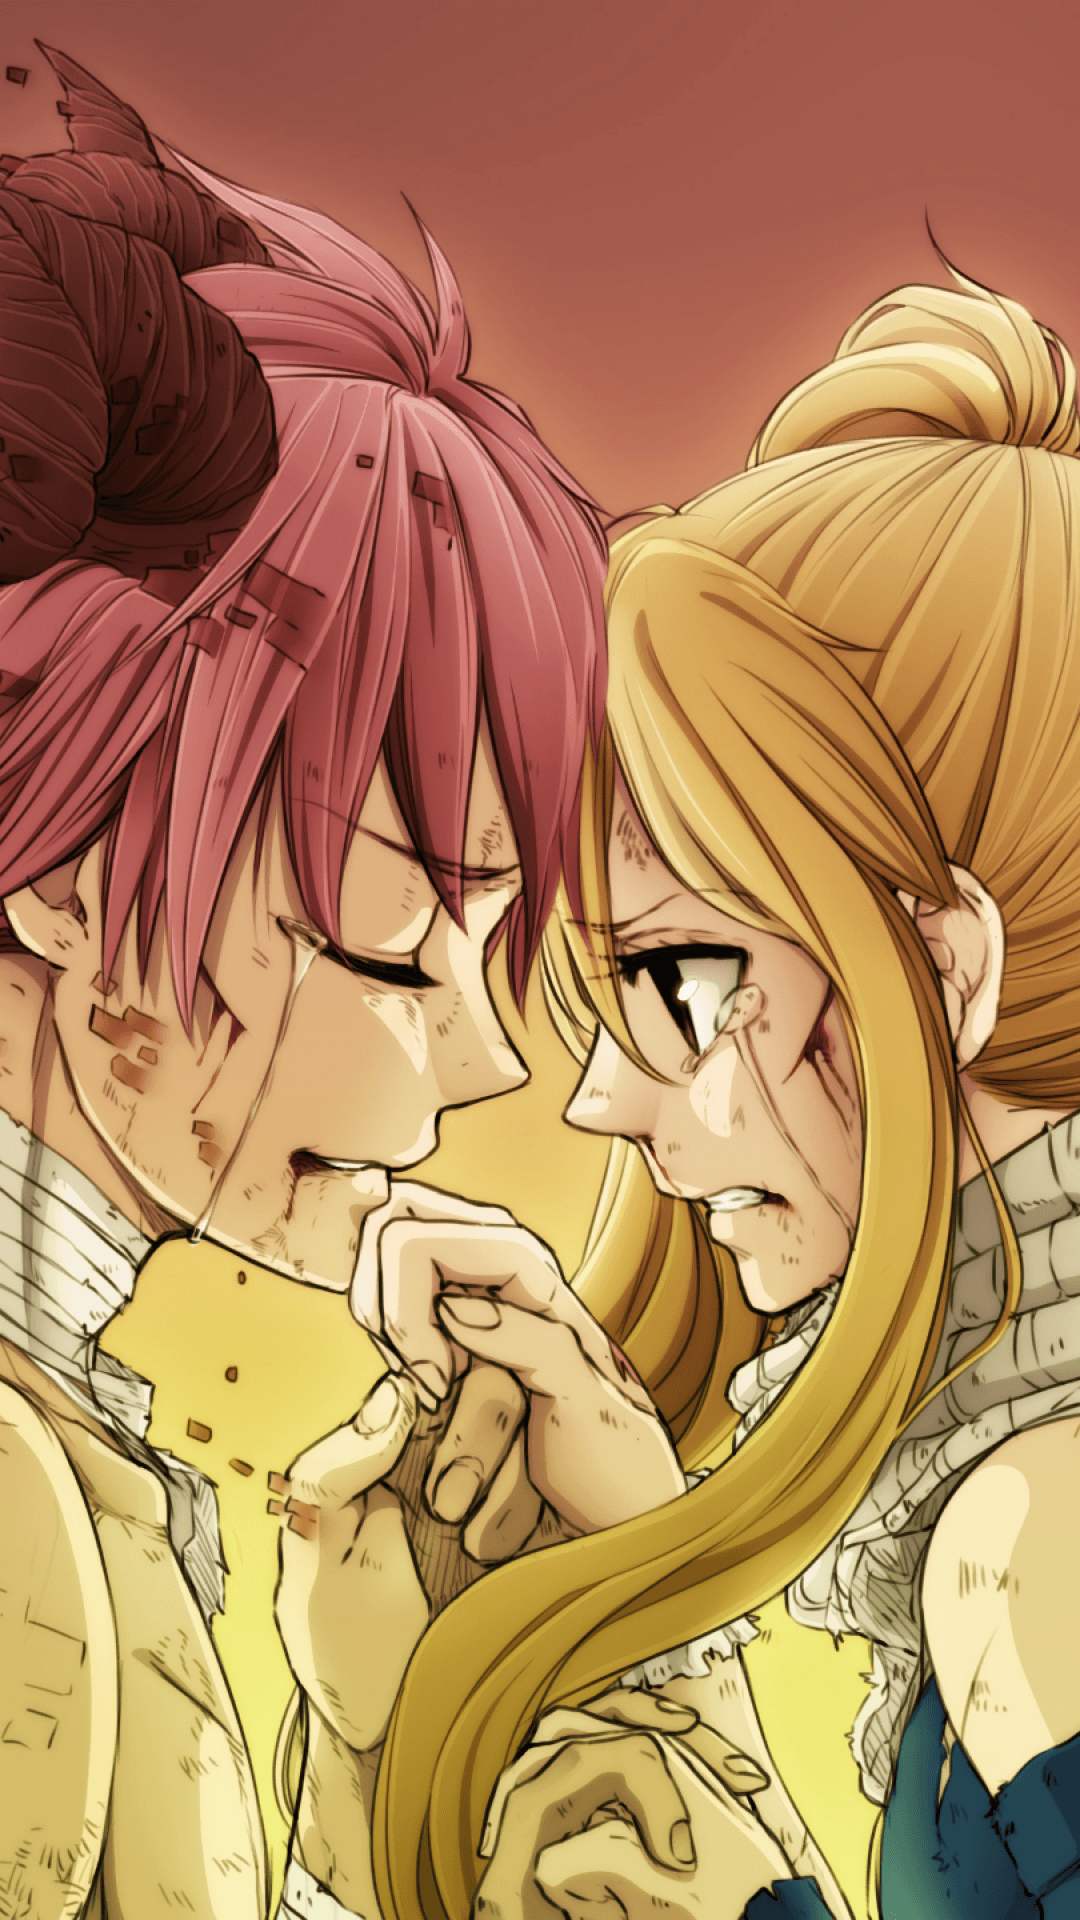 Fairy Tail Iphone Wallpapers Top Free Fairy Tail Iphone